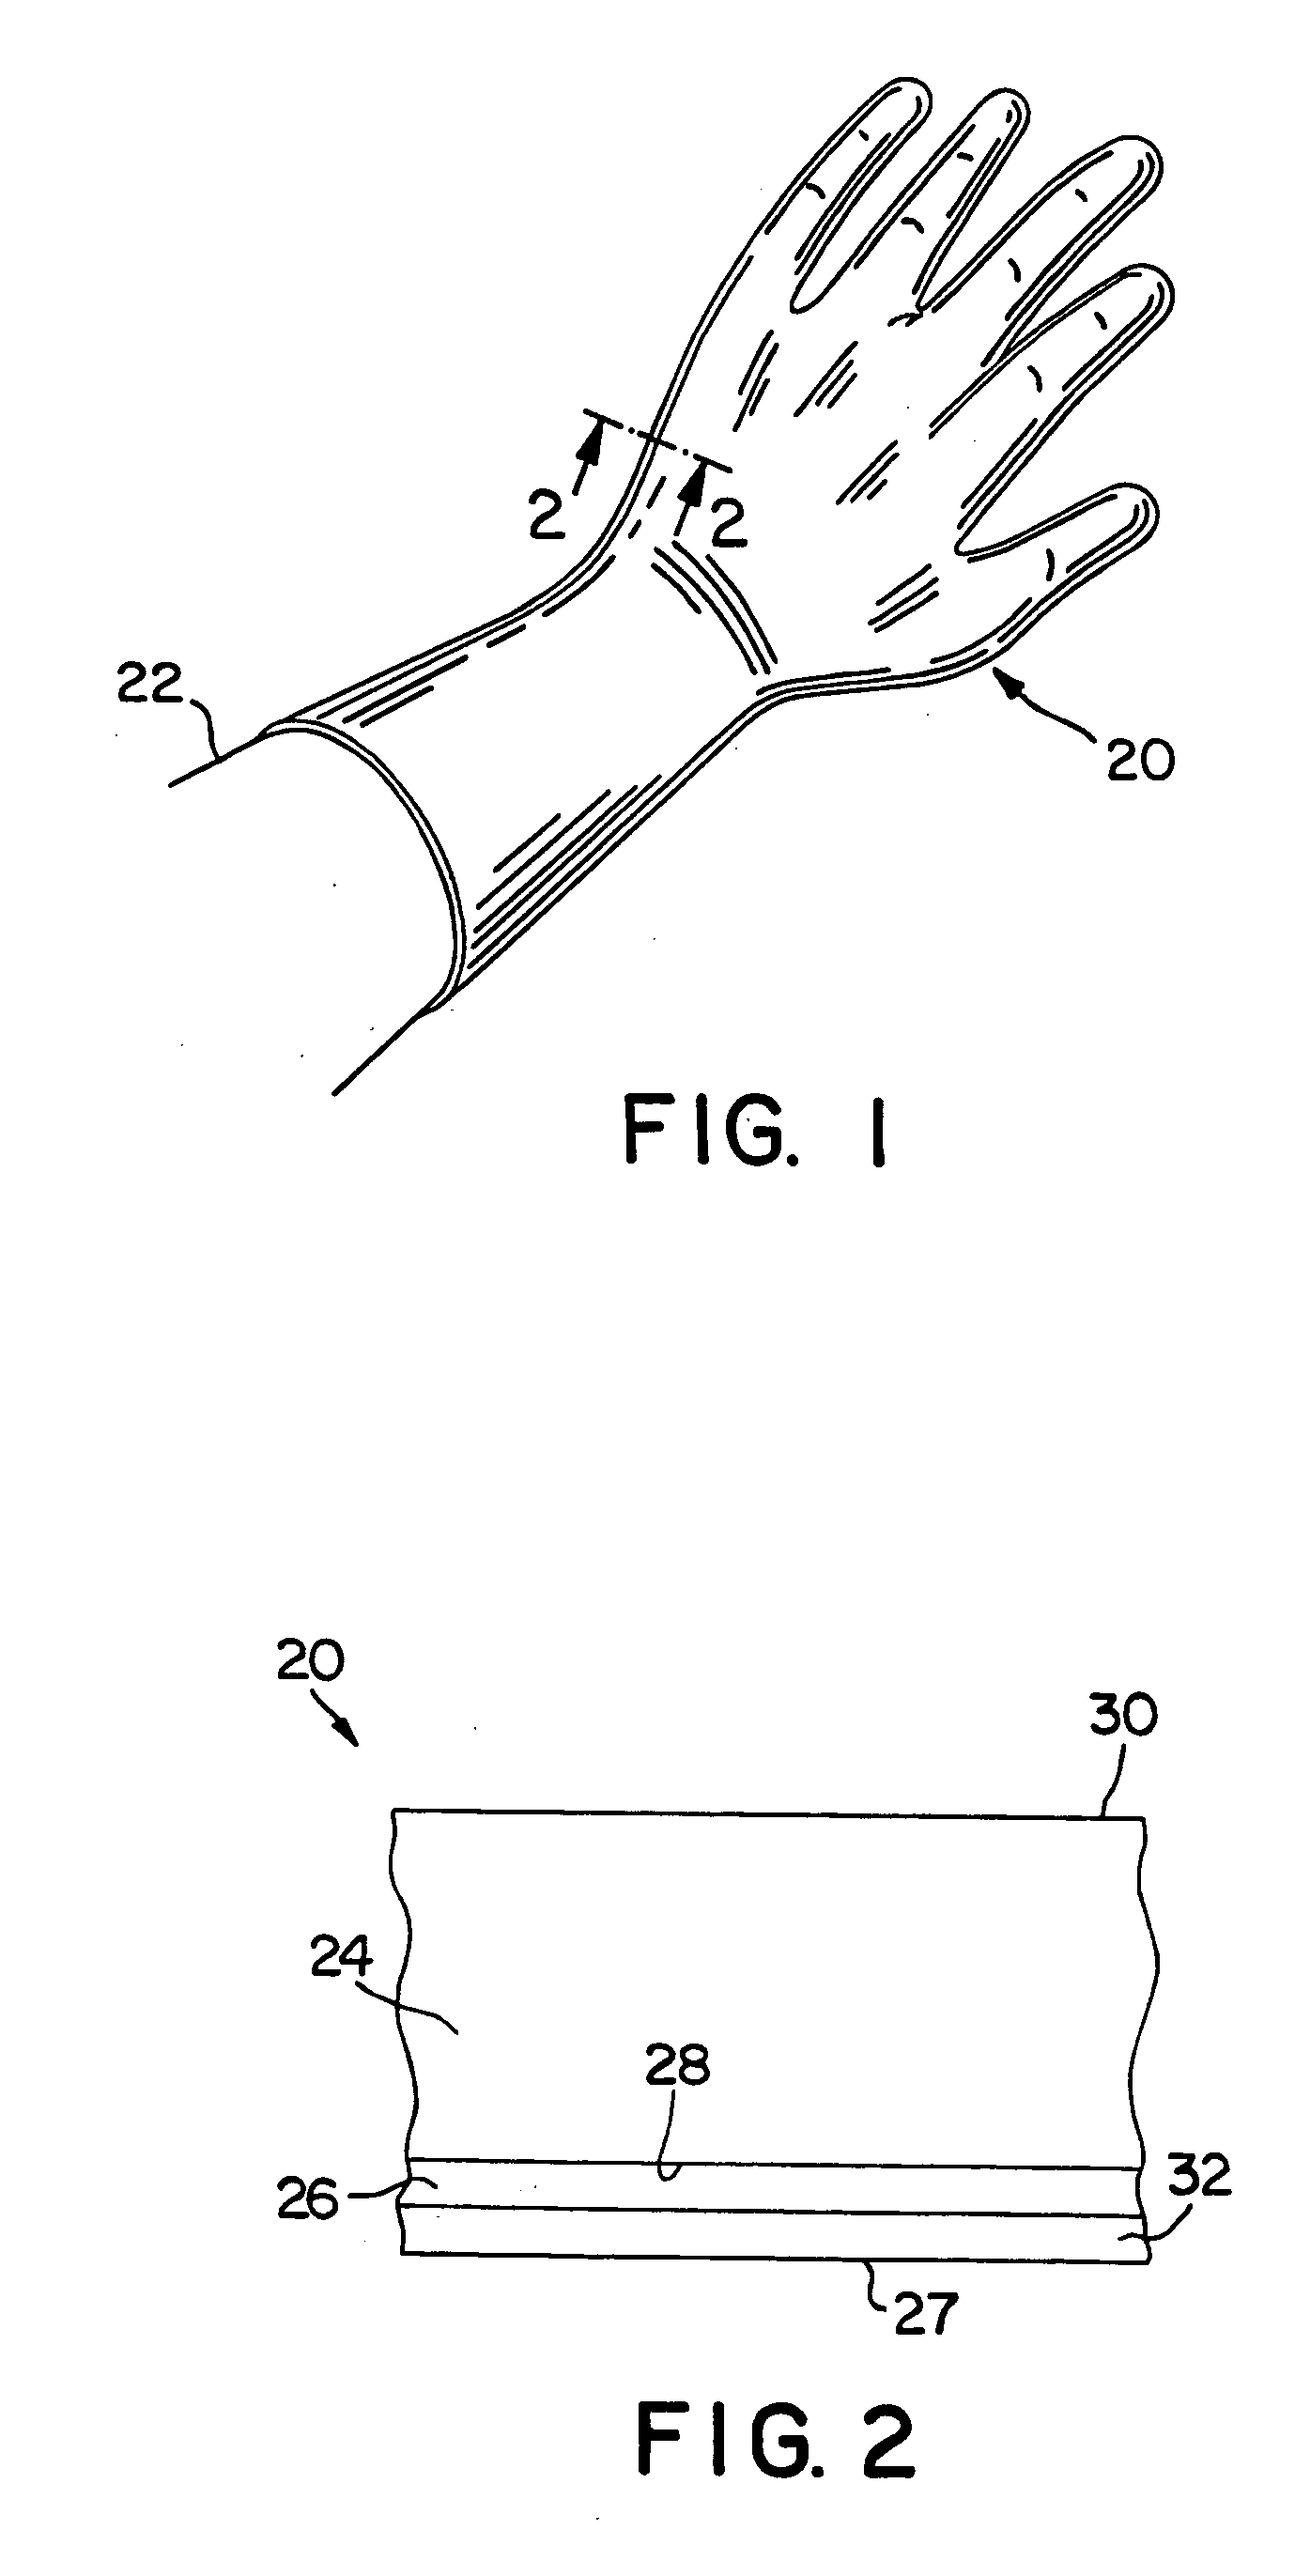 Method for forming an elastomeric article